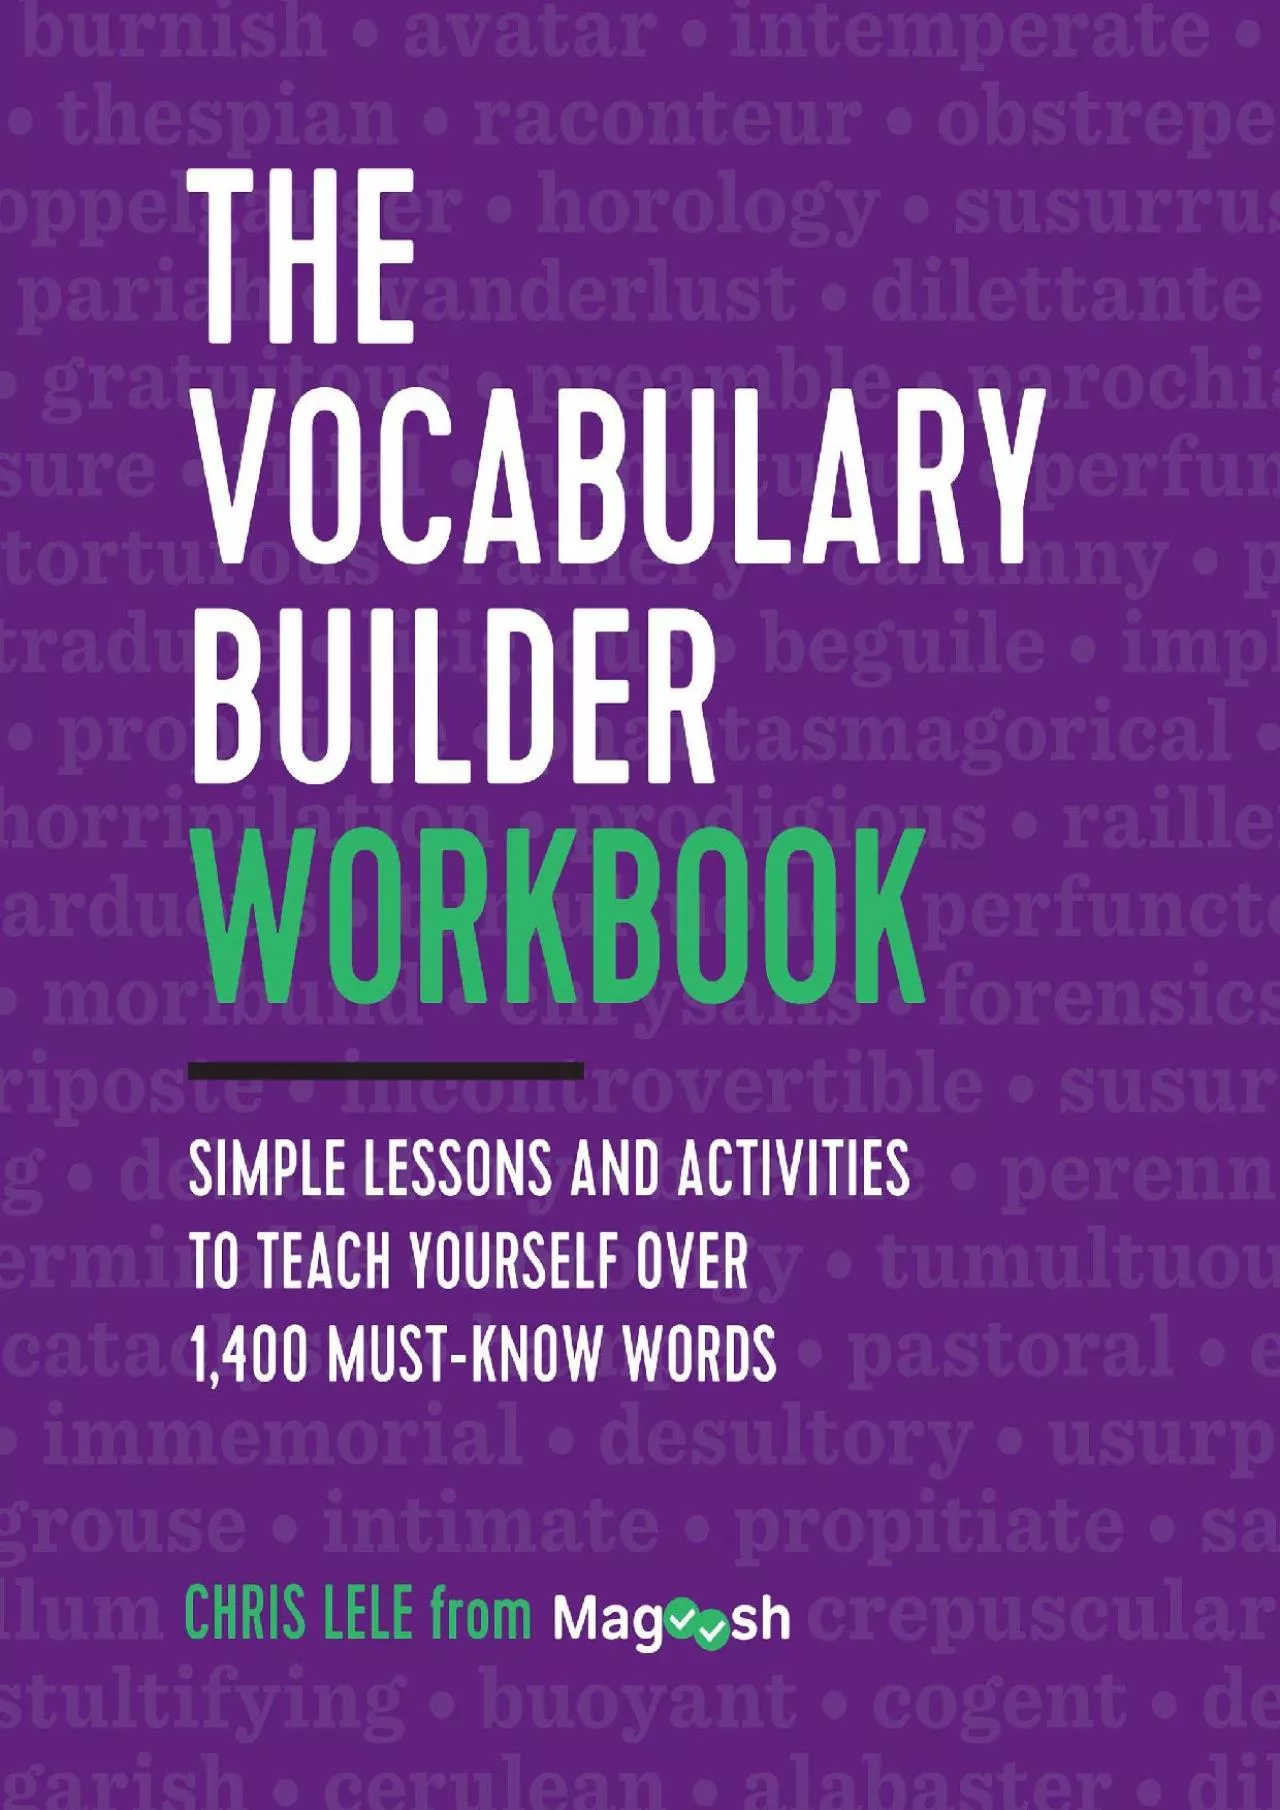 [EBOOK] The Vocabulary Builder Workbook: Simple Lessons and Activities to Teach Yourself